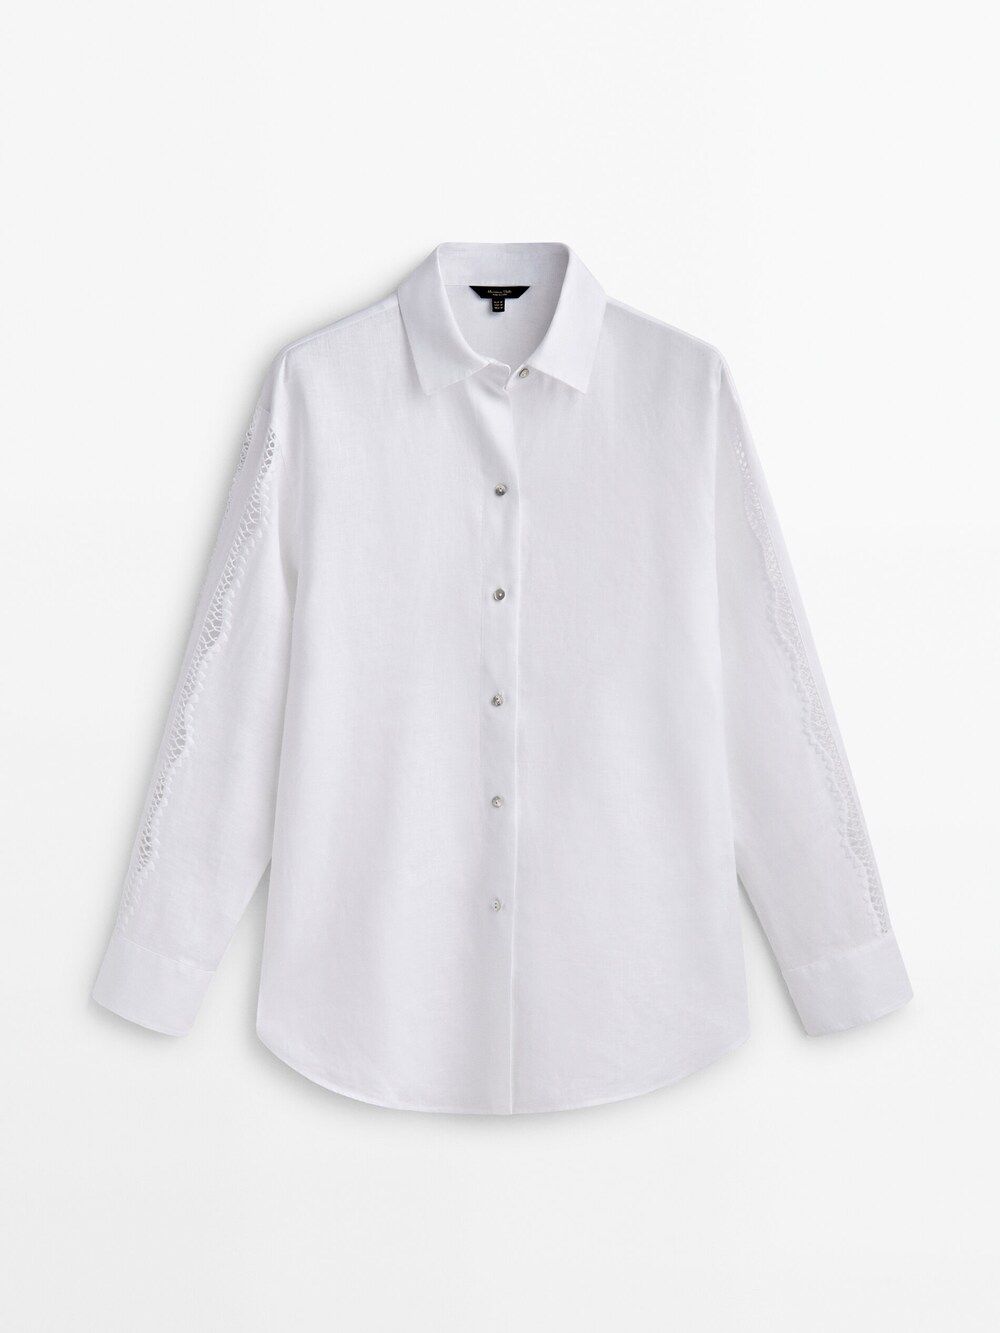 100% linen shirt with embroidered sleeves | Massimo Dutti (US)